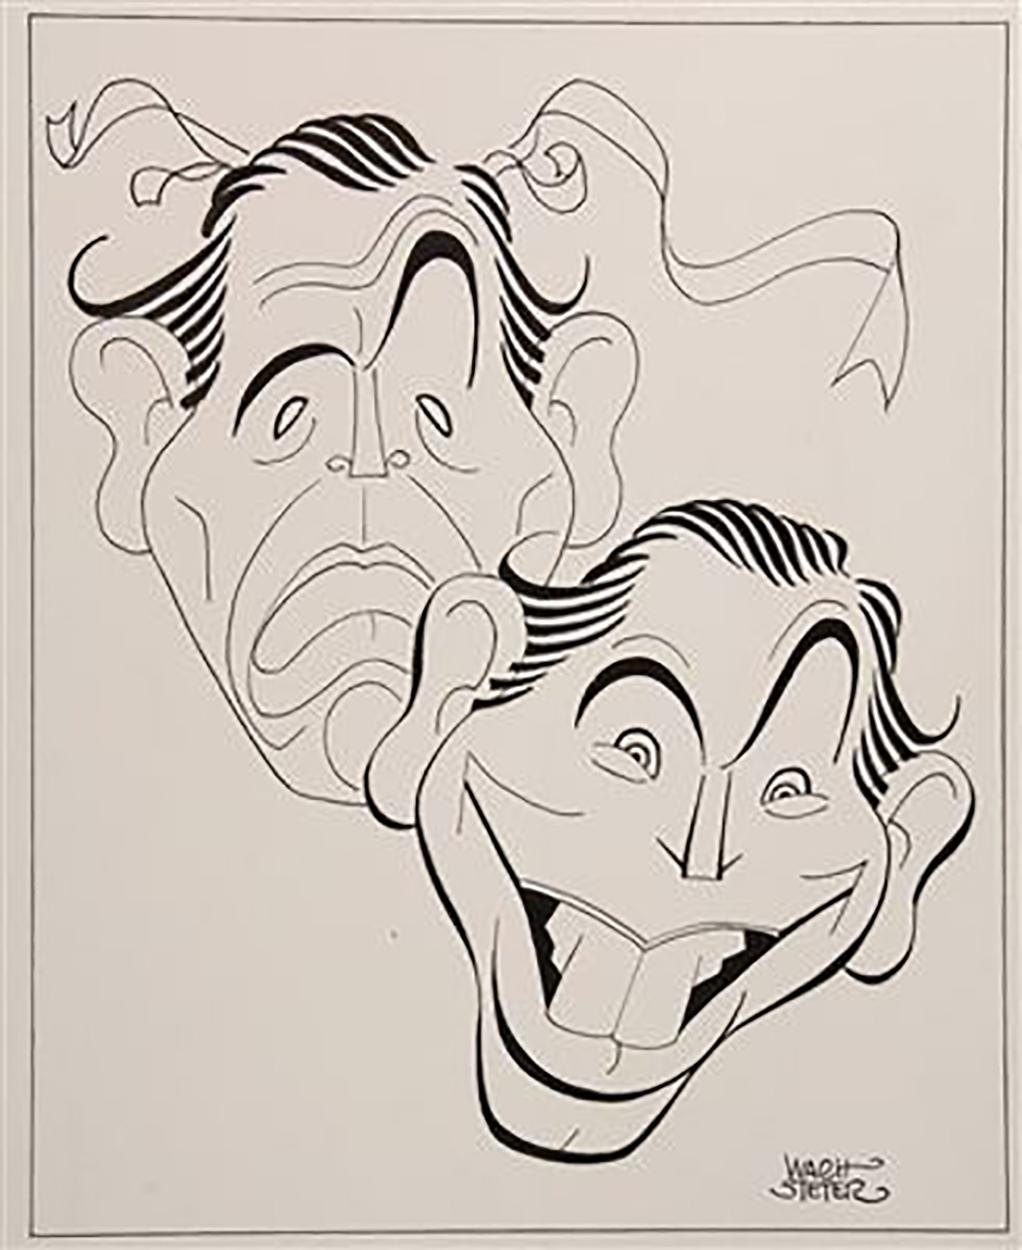 George Wachsteter Figurative Art - Milton Berle as Greek Masks of Comedy and Tragedy